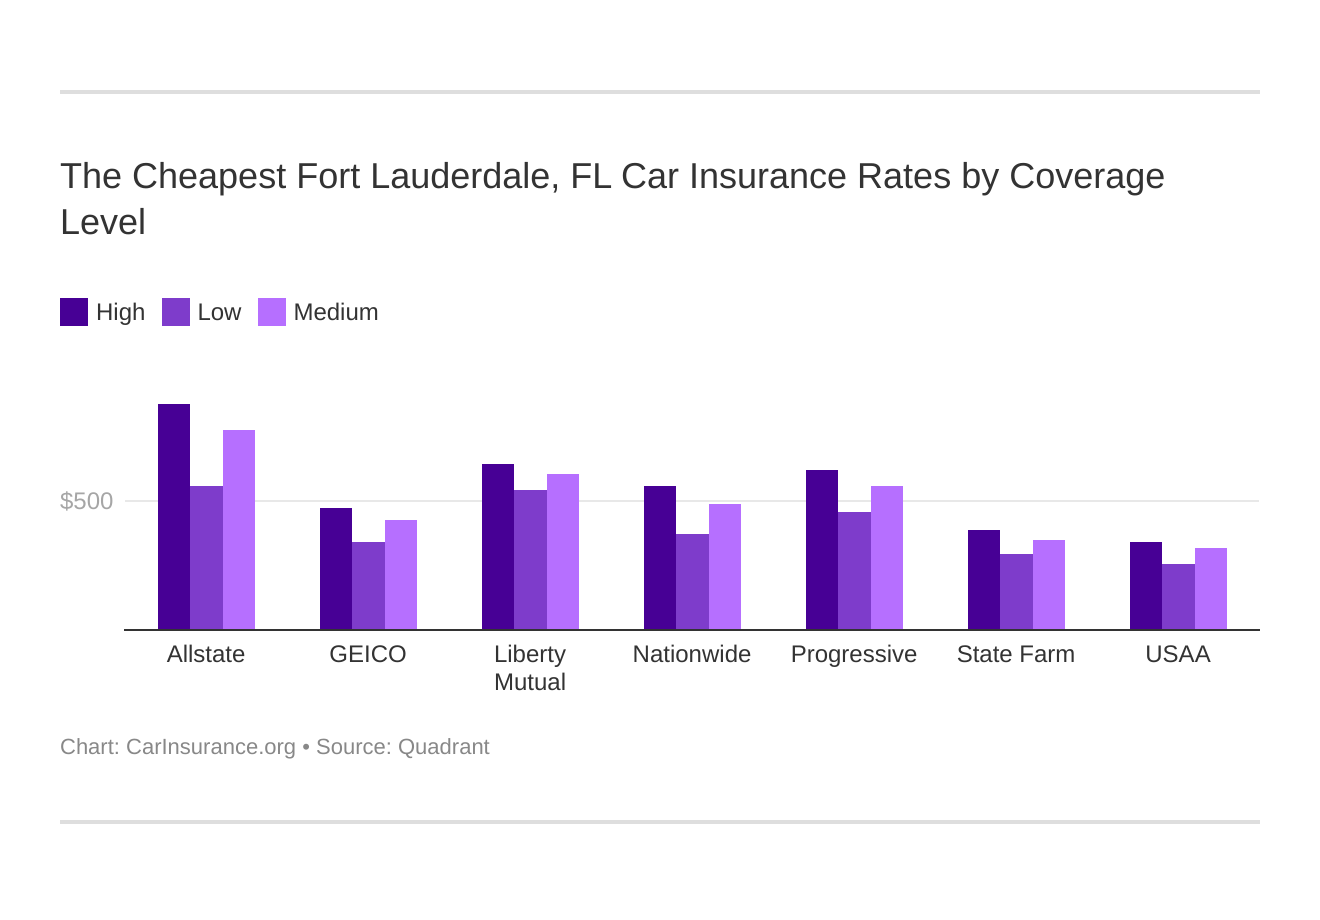 The Cheapest Fort Lauderdale, FL Car Insurance Rates by Coverage Level